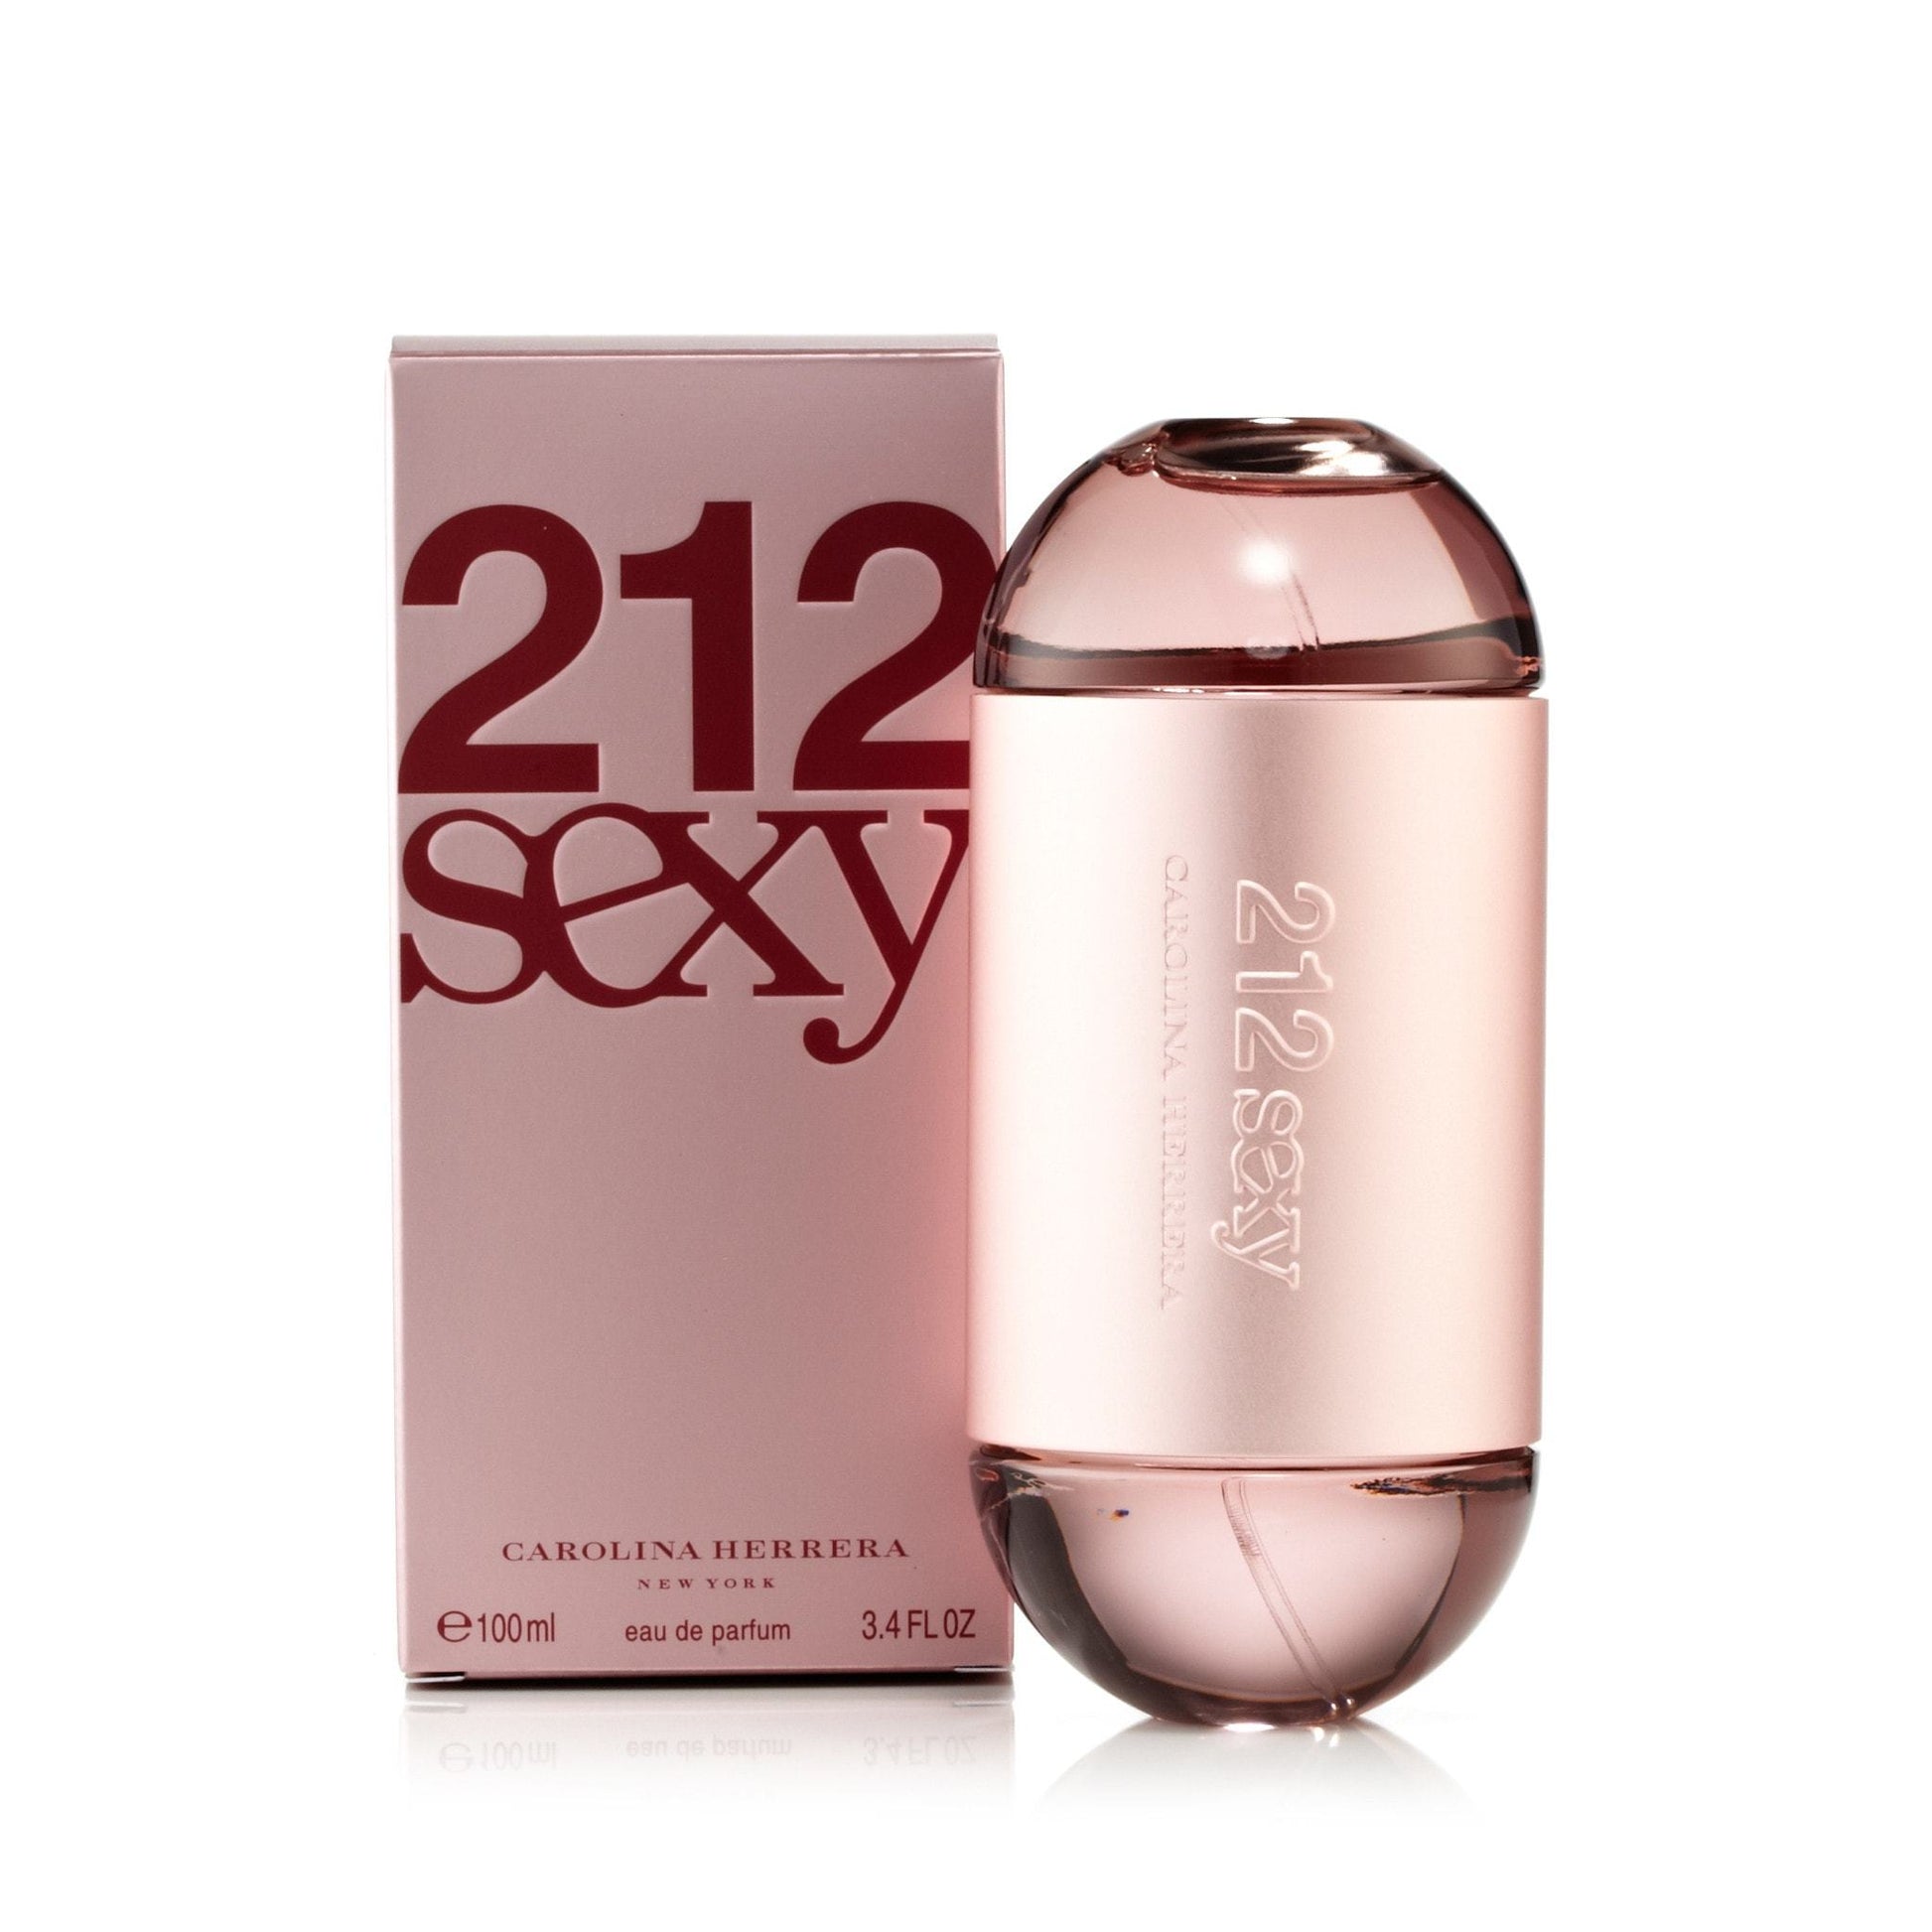 Sexy Women 212 EDP Carolina Fragrance by Outlet – Herrera for